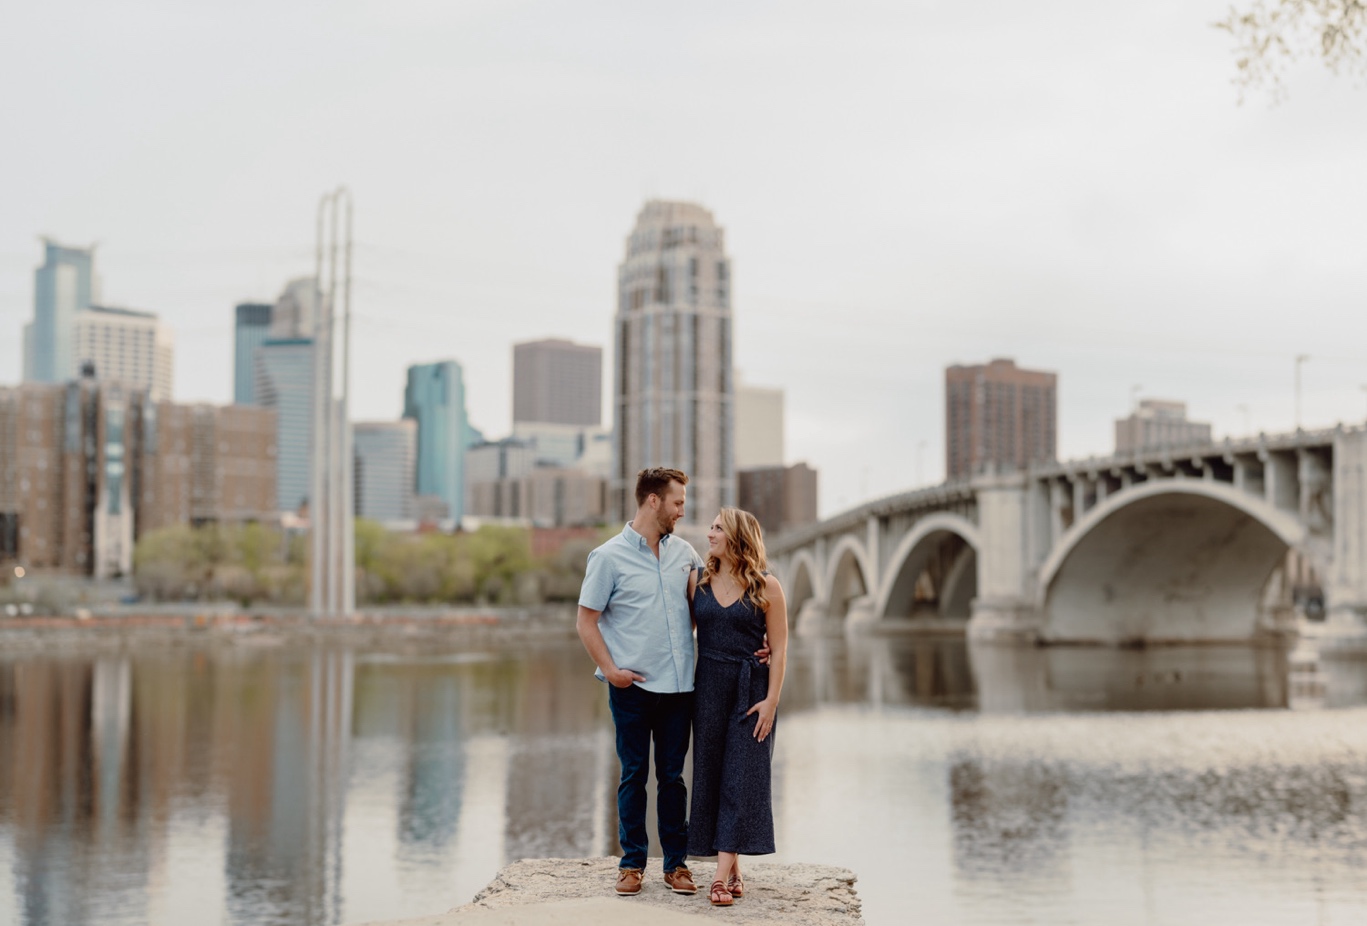 Northeast Minneapolis Engagement photos at St.Anthony Main